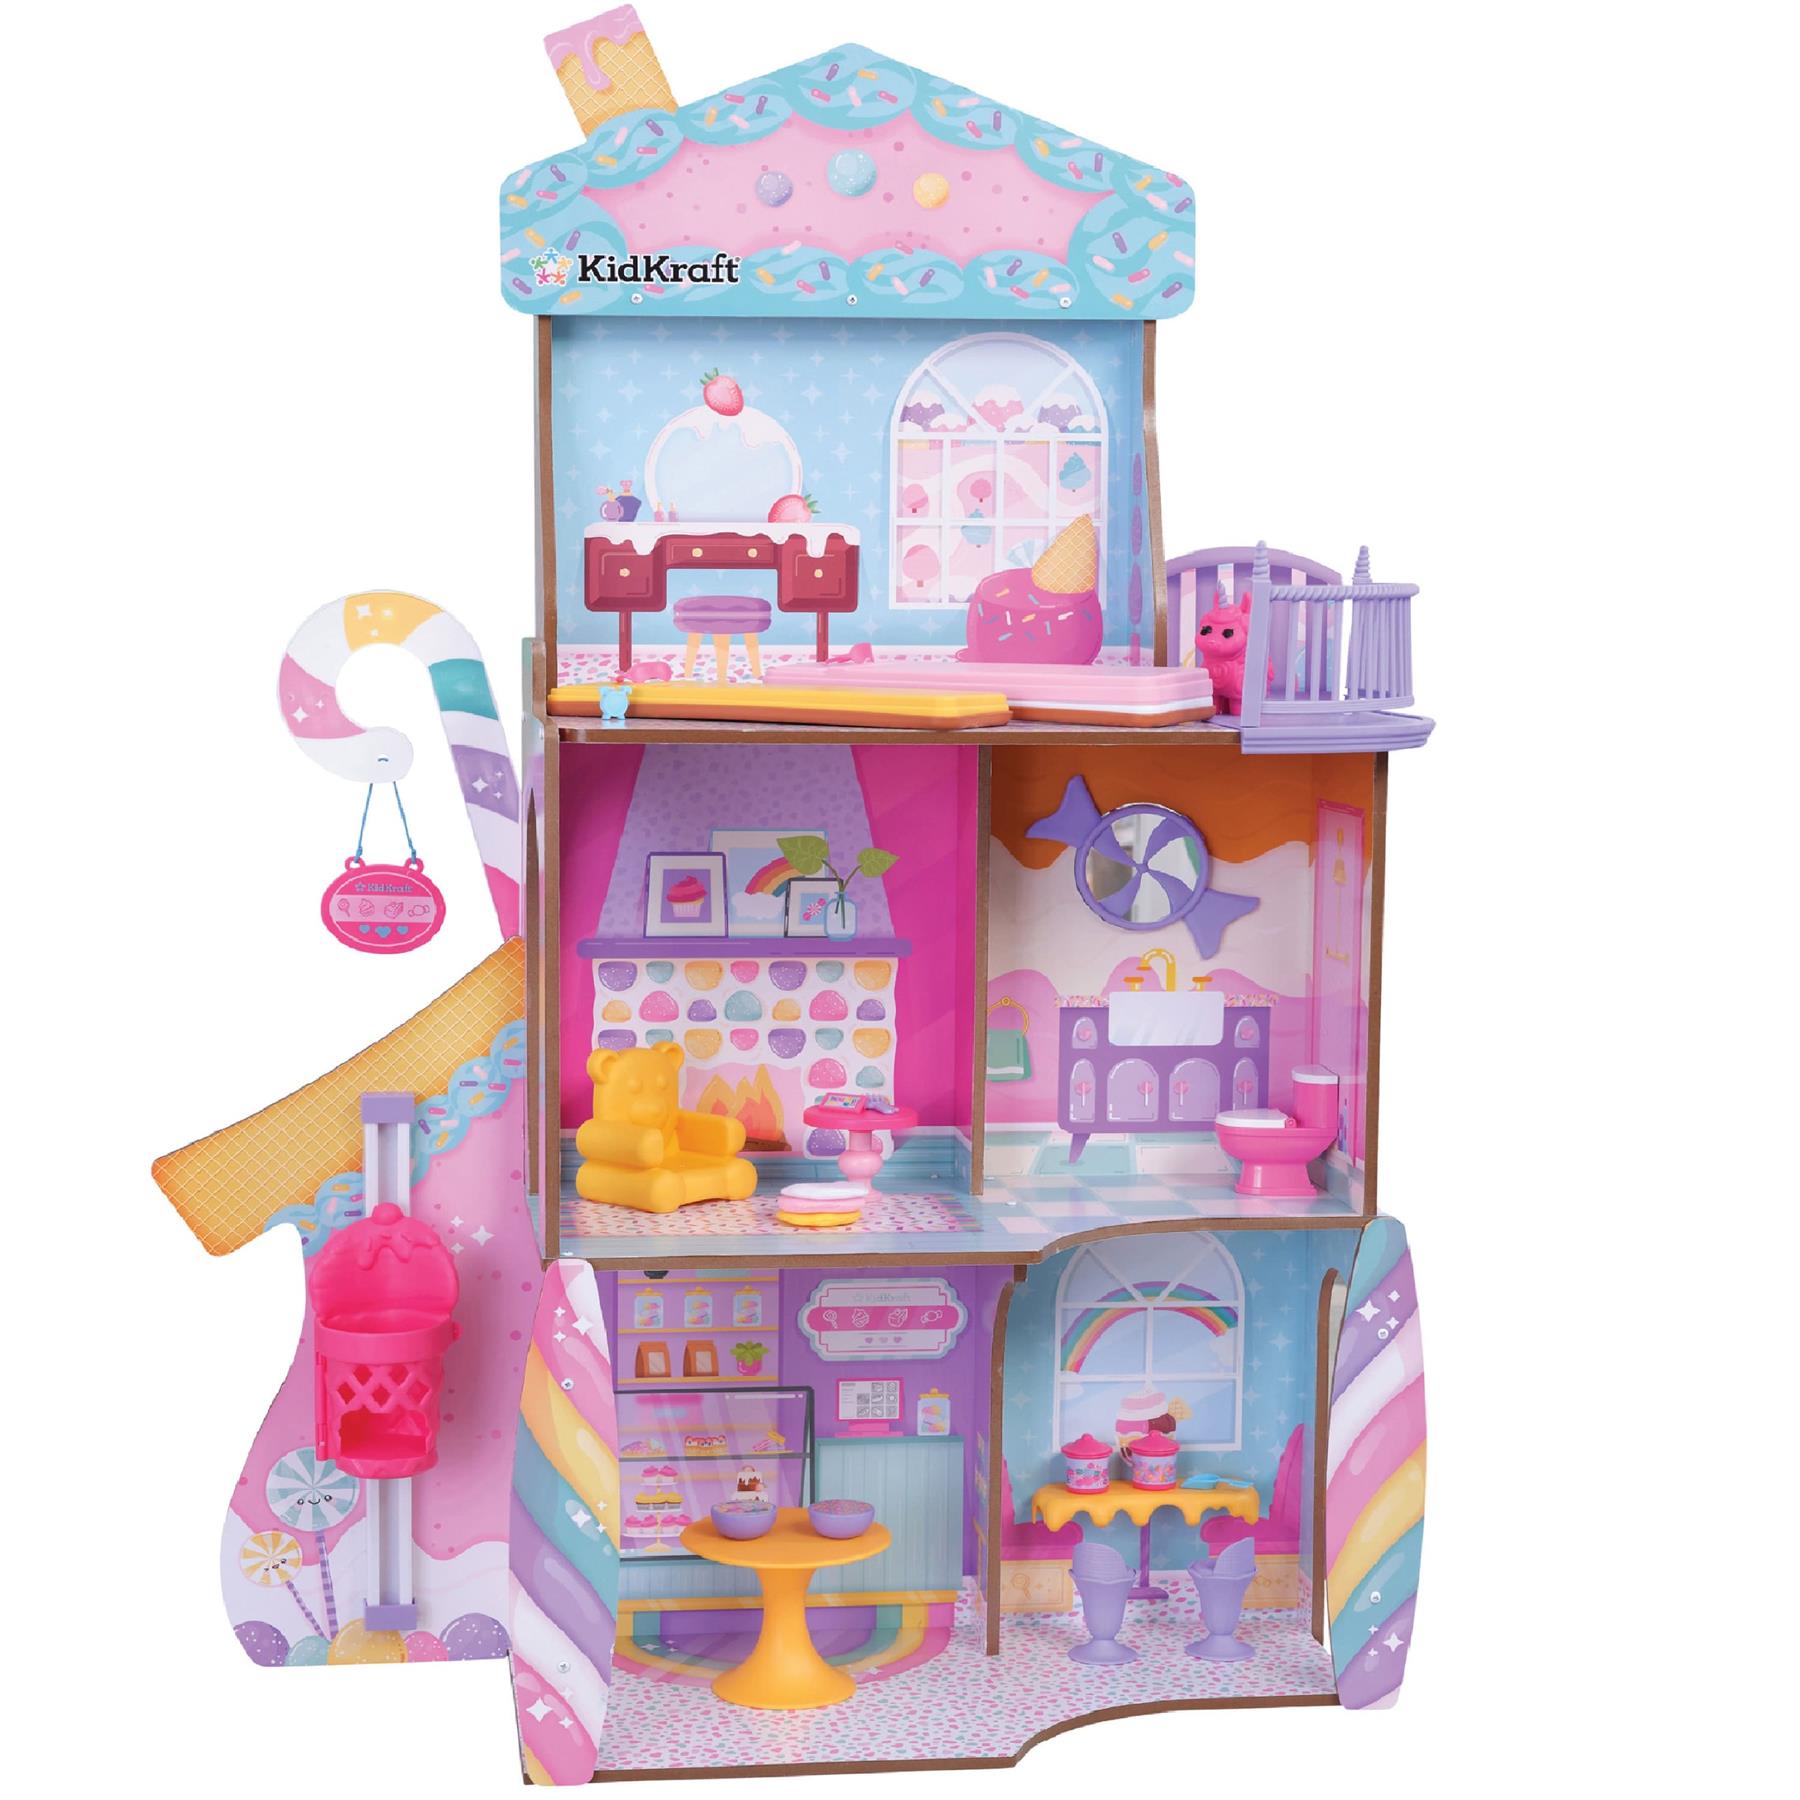 KidKraft Wooden Candy Castle Dolls House from Bargain Max